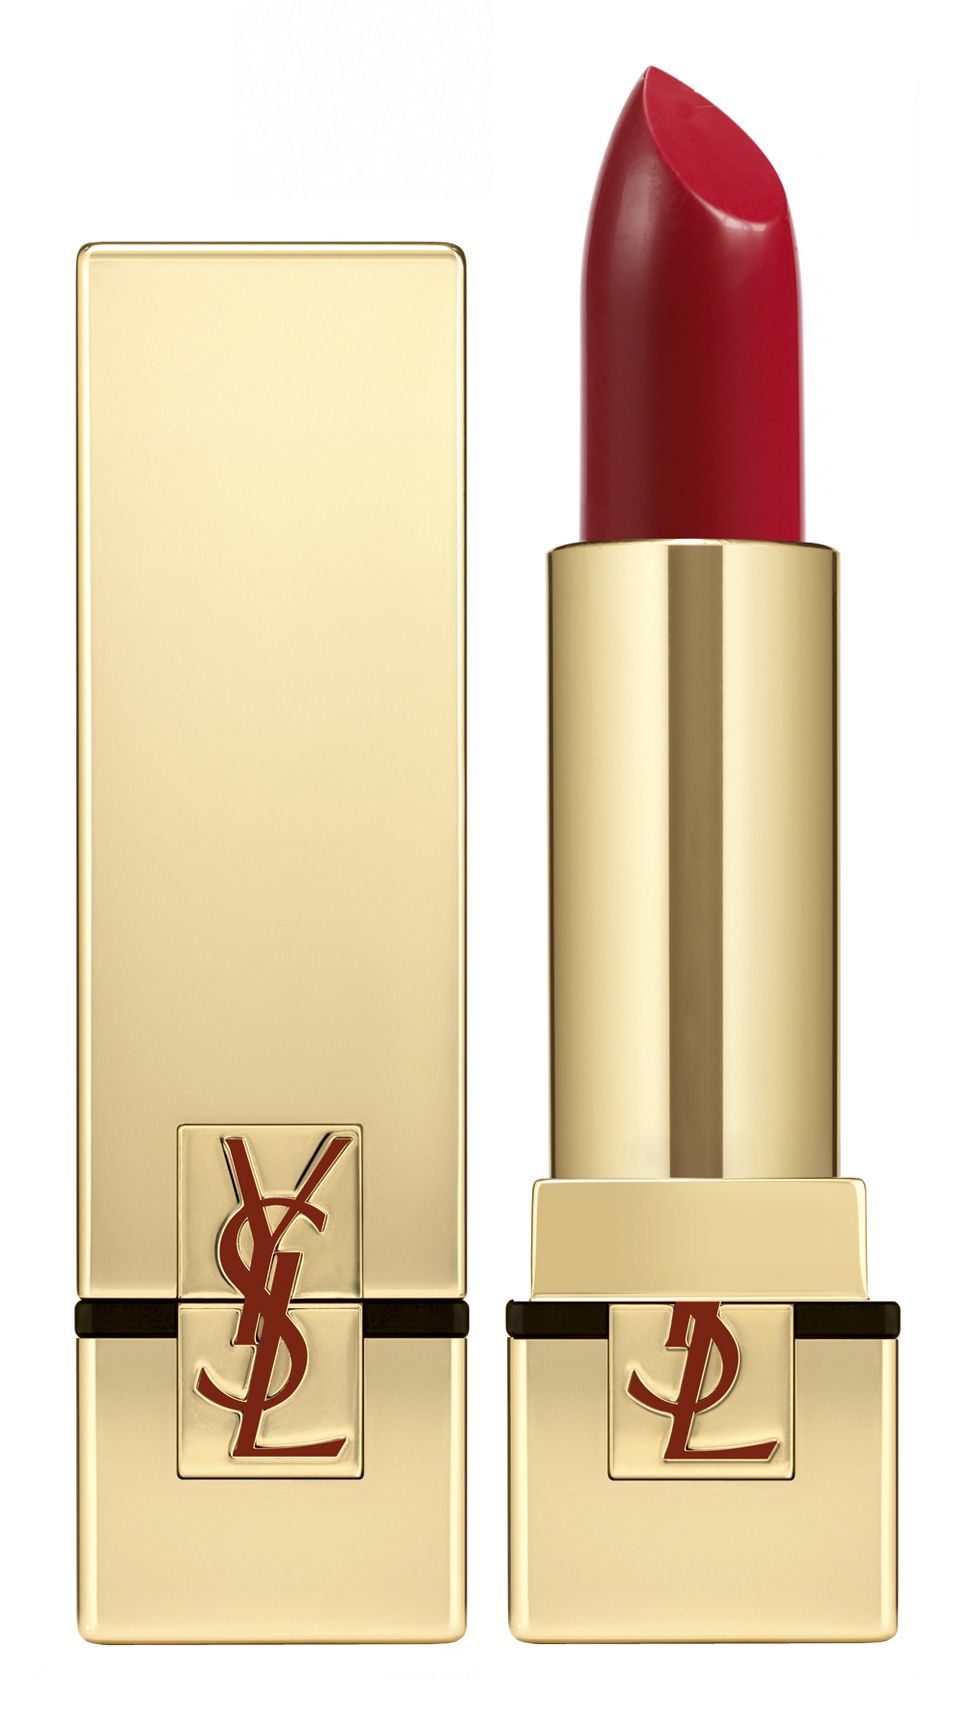 Red, Lipstick, Carmine, Maroon, Beige, Symbol, Parallel, Cosmetics, Cylinder, Material property, 